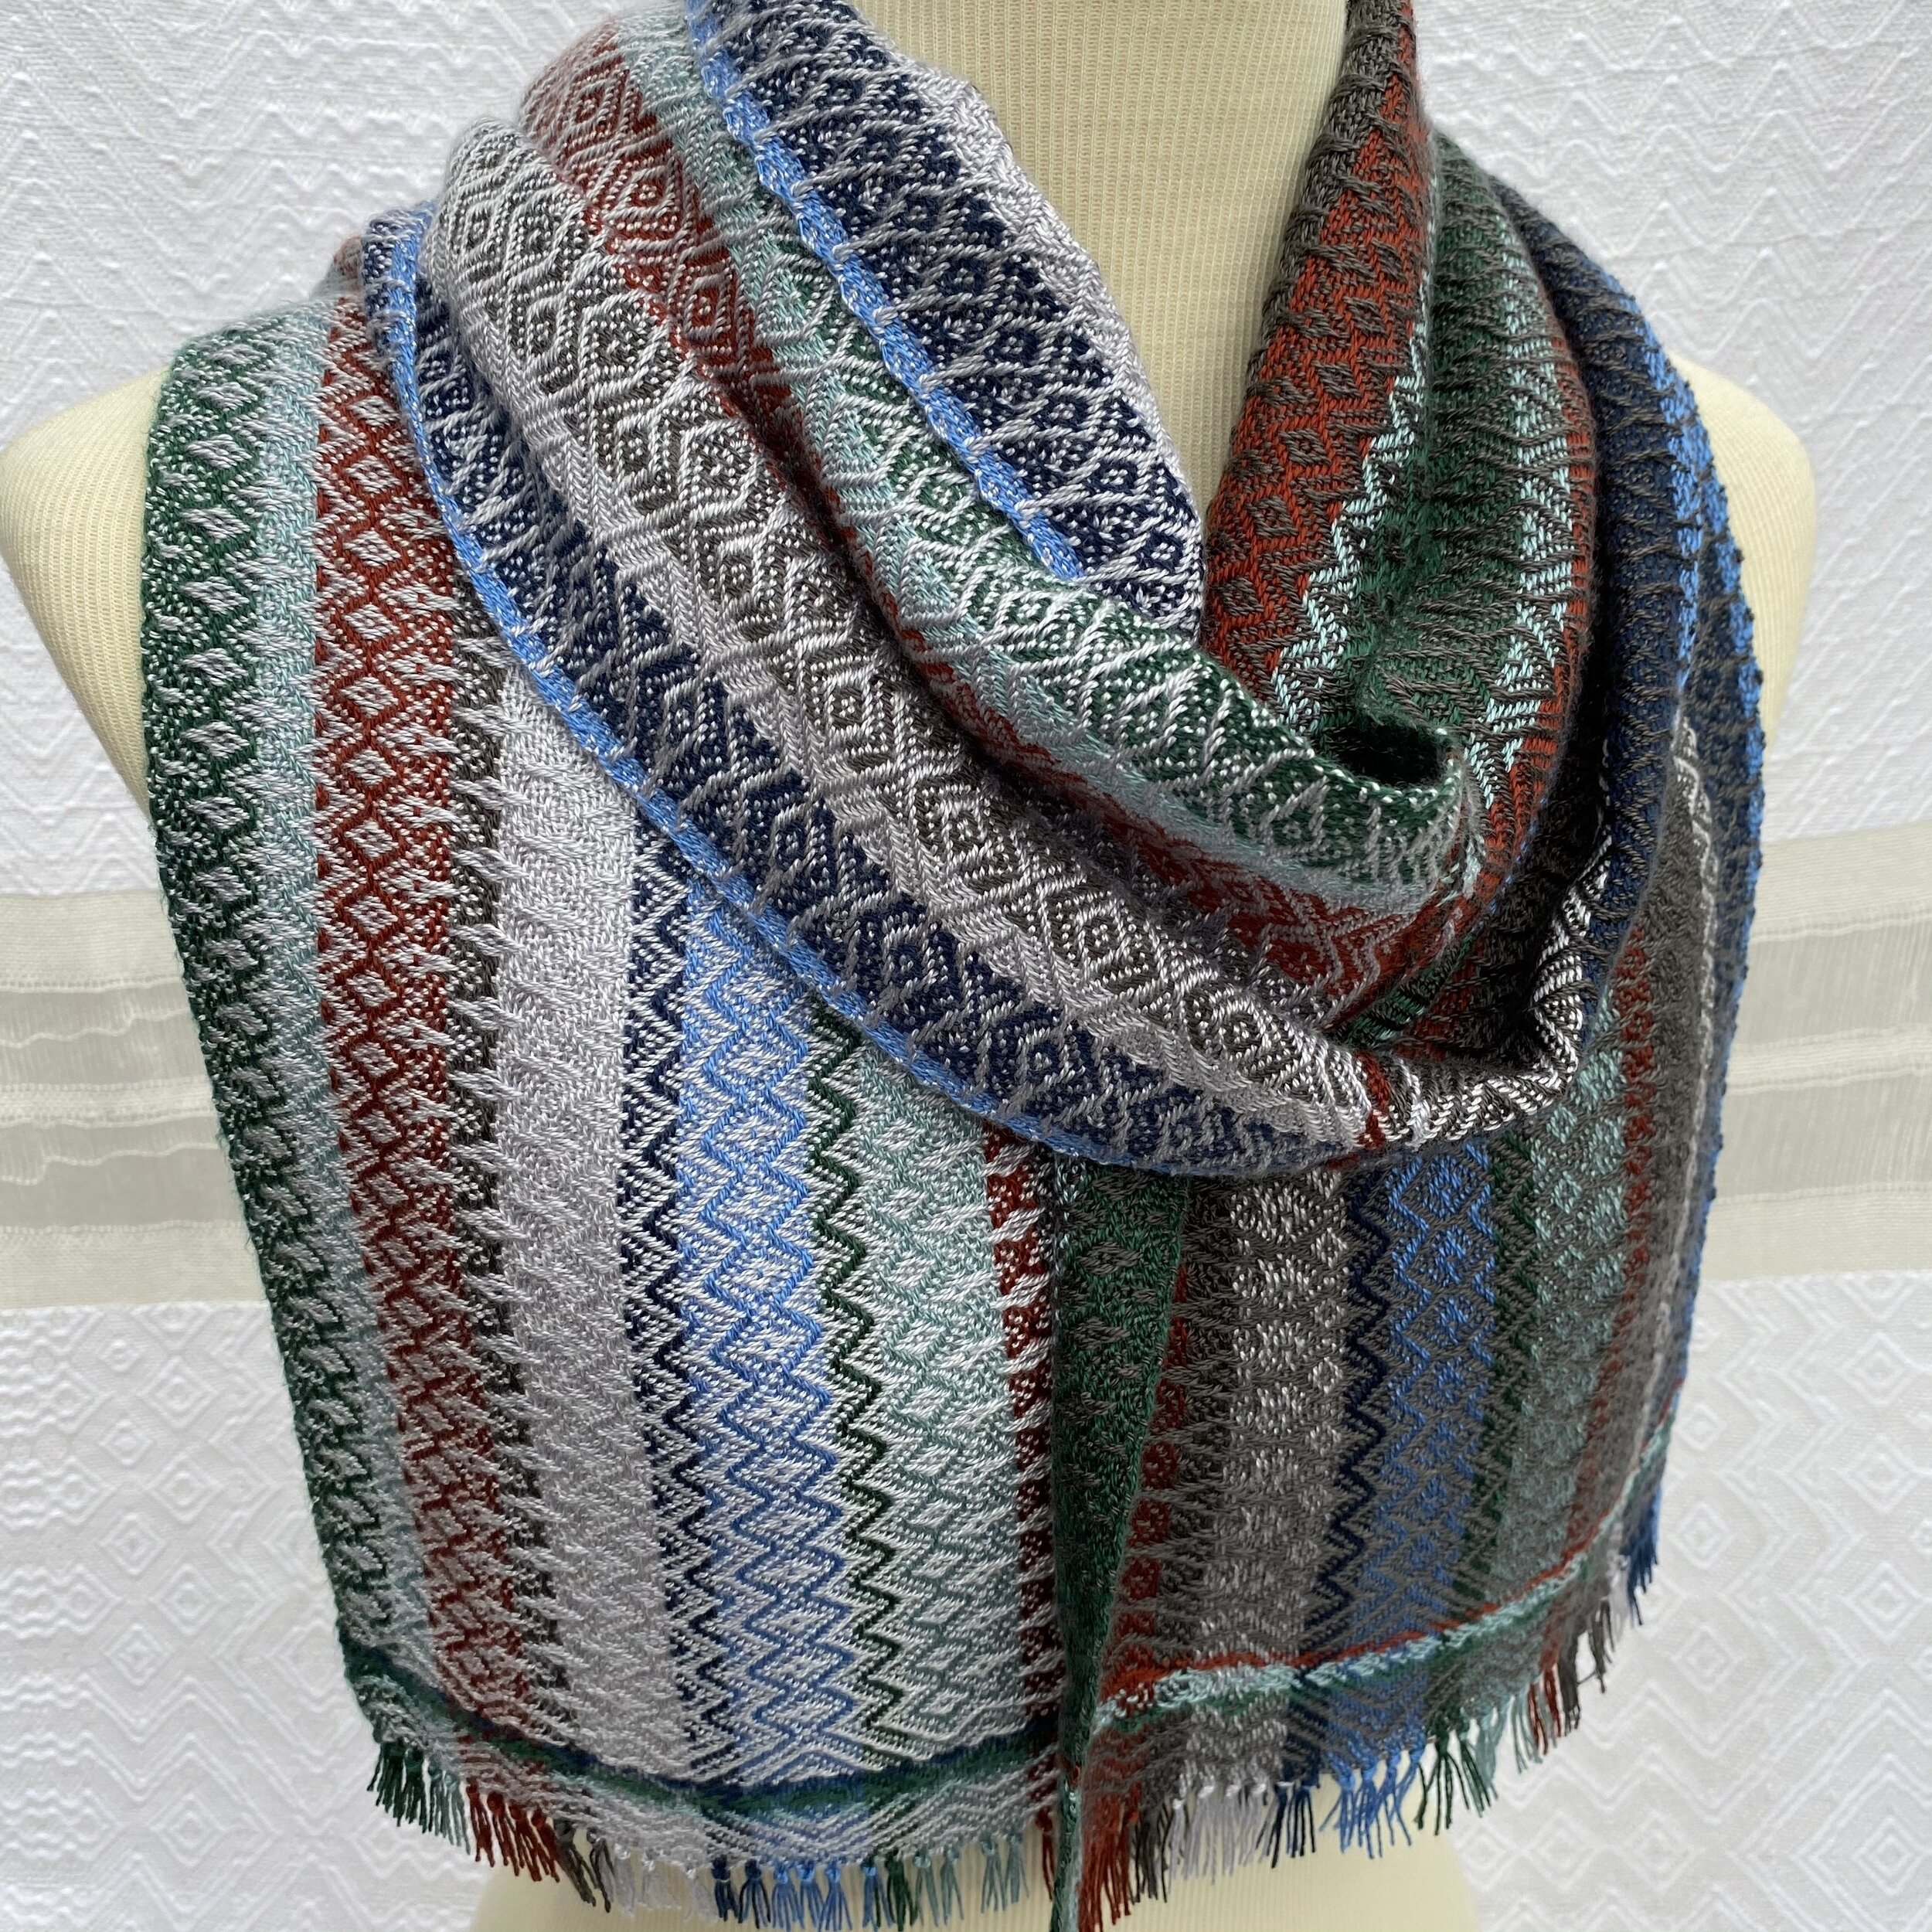  Winter Stripes with Grays Handwoven Scarf     